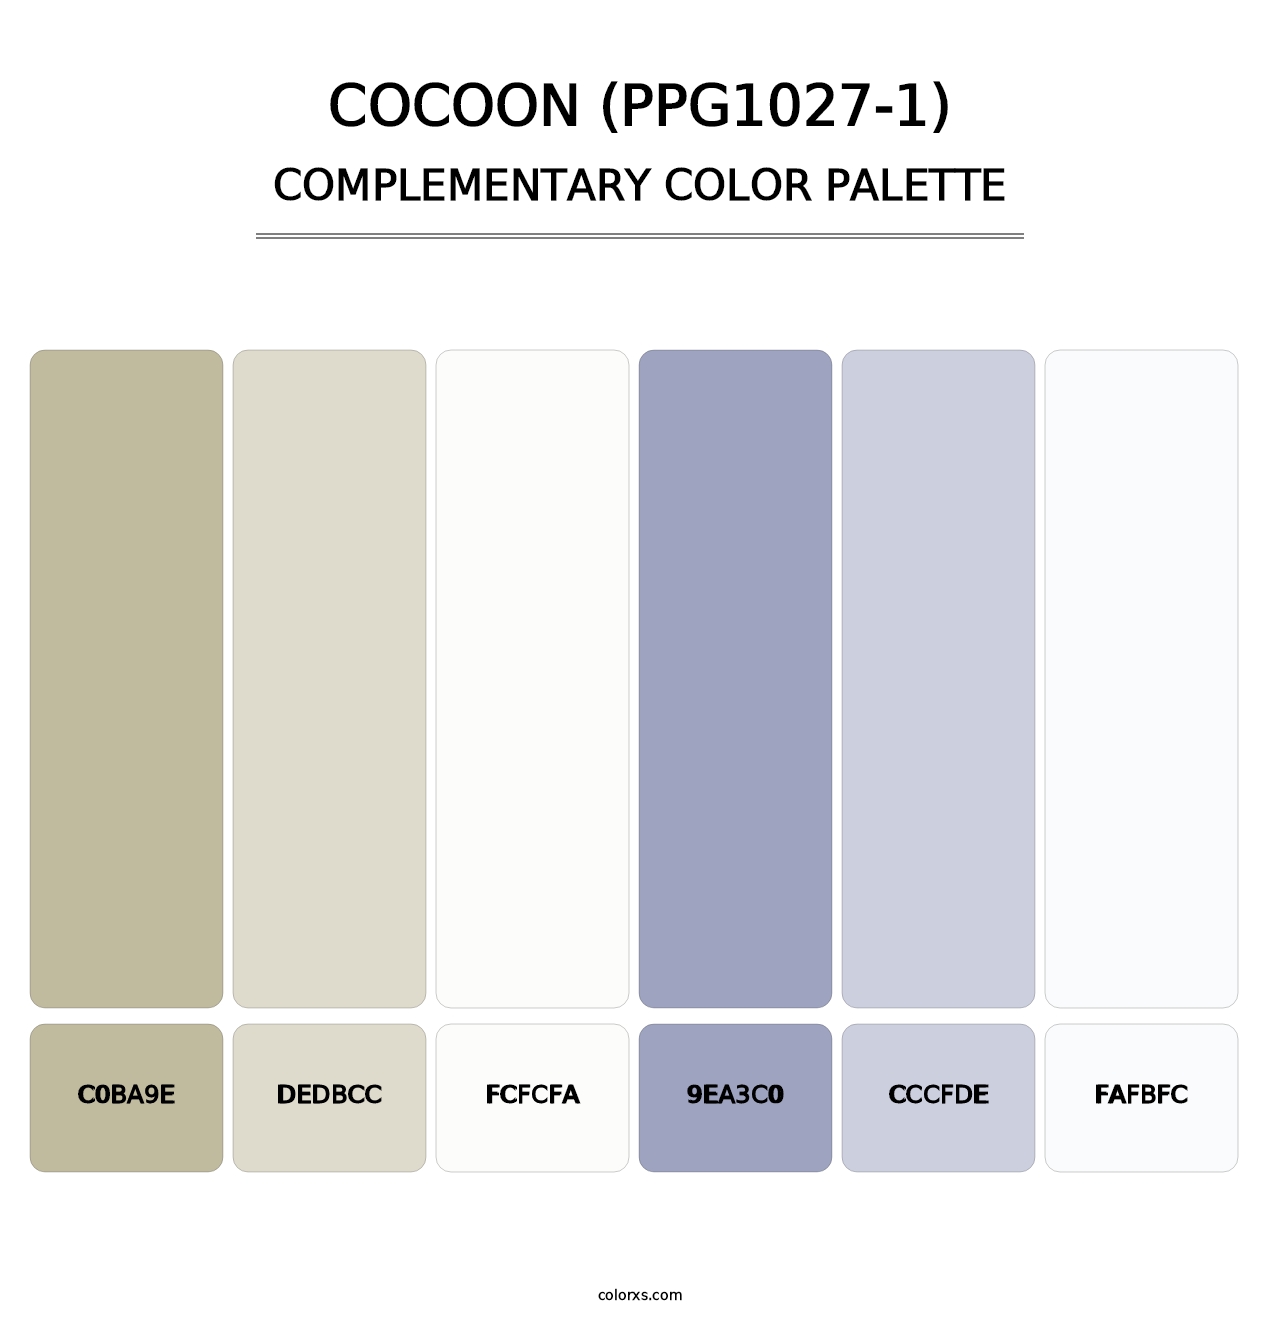 Cocoon (PPG1027-1) - Complementary Color Palette